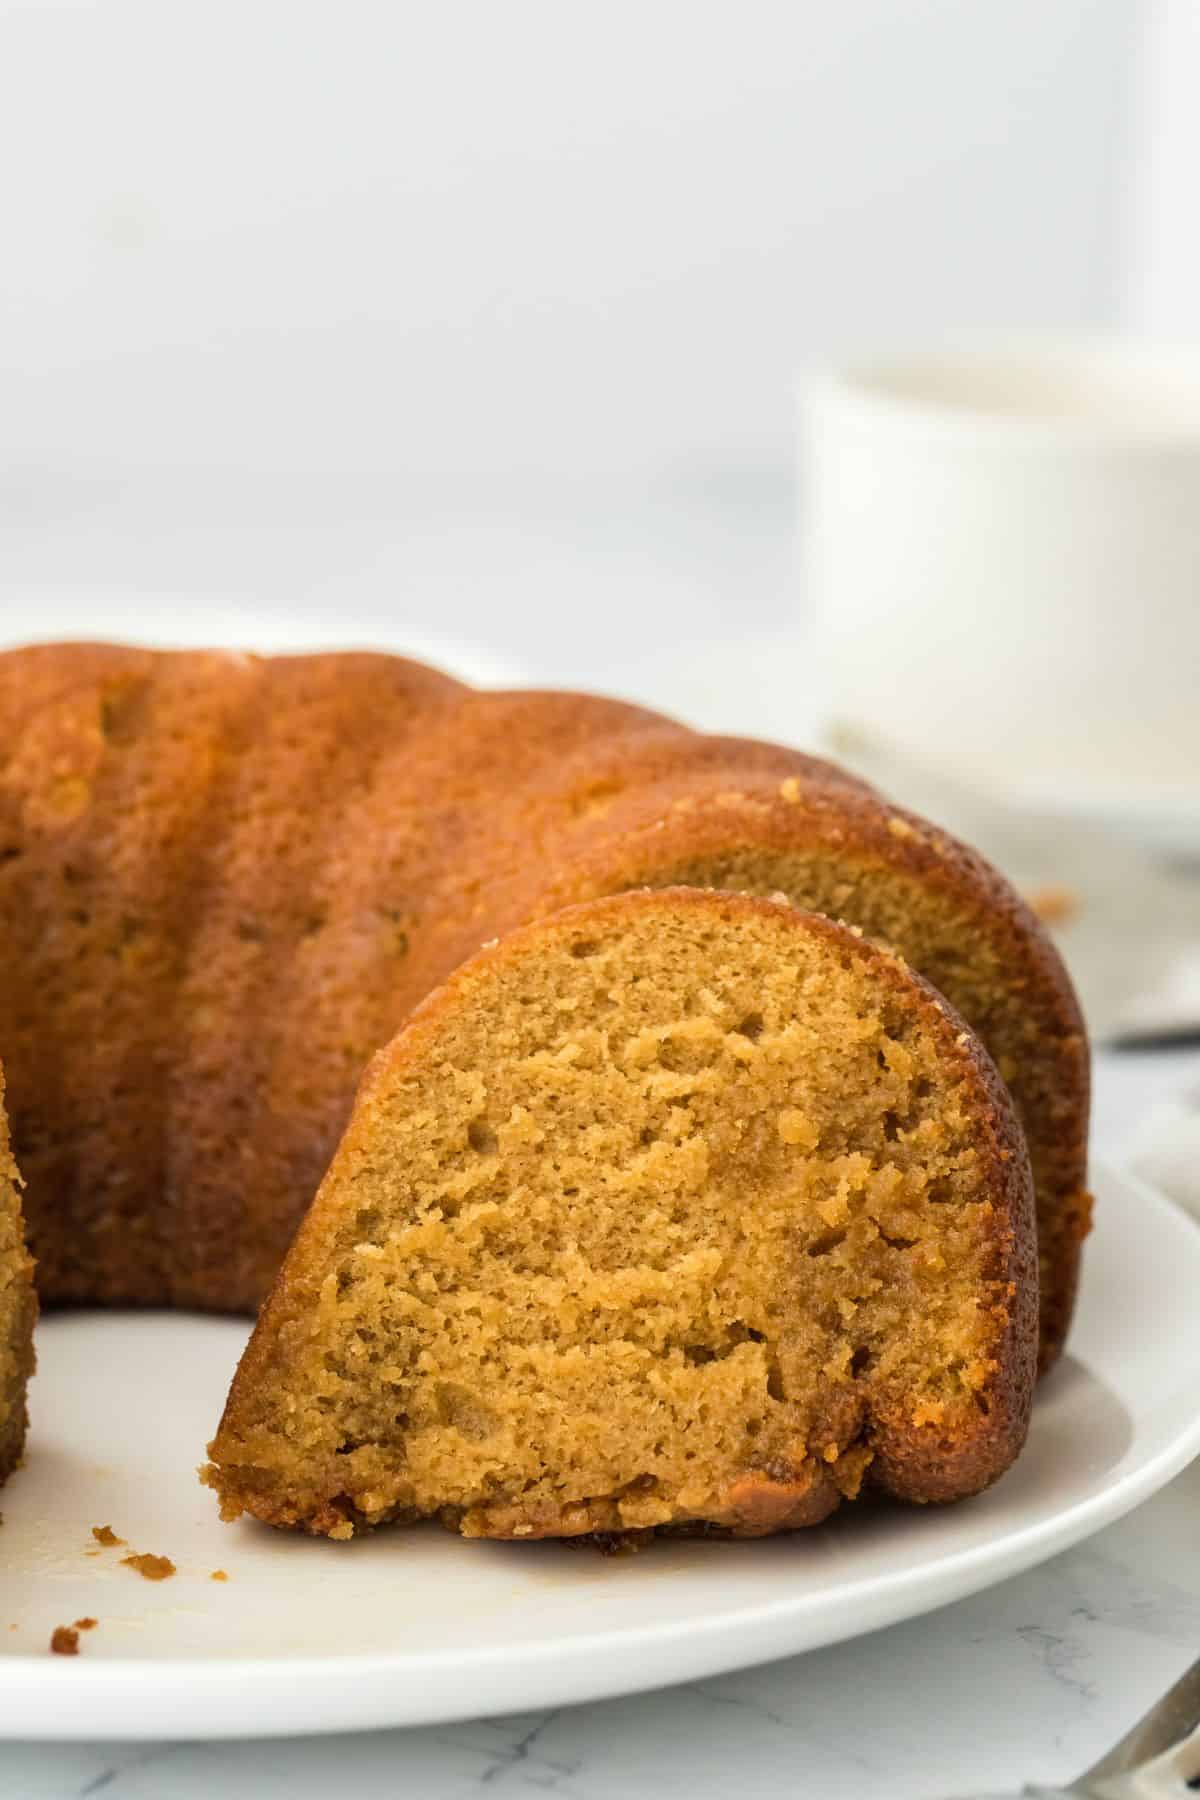 A slice of golden-brown rum cake on a plate, with the rest of the cake in the background, showcasing a moist and airy crumb texture.